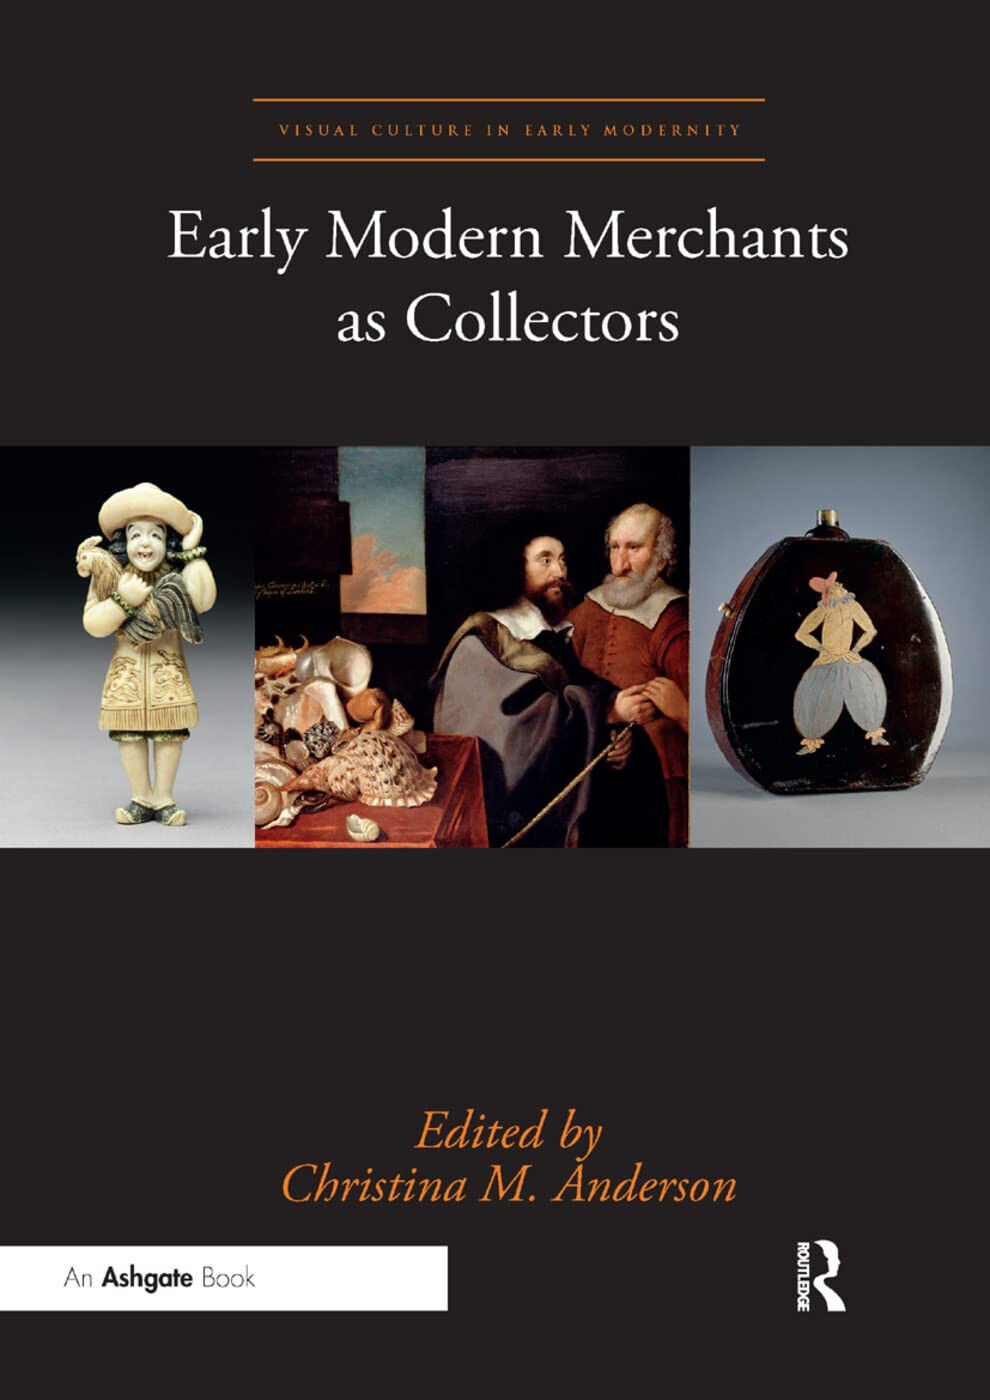 Early Modern Merchants as Collectors - Christina M. Anderson - 2019